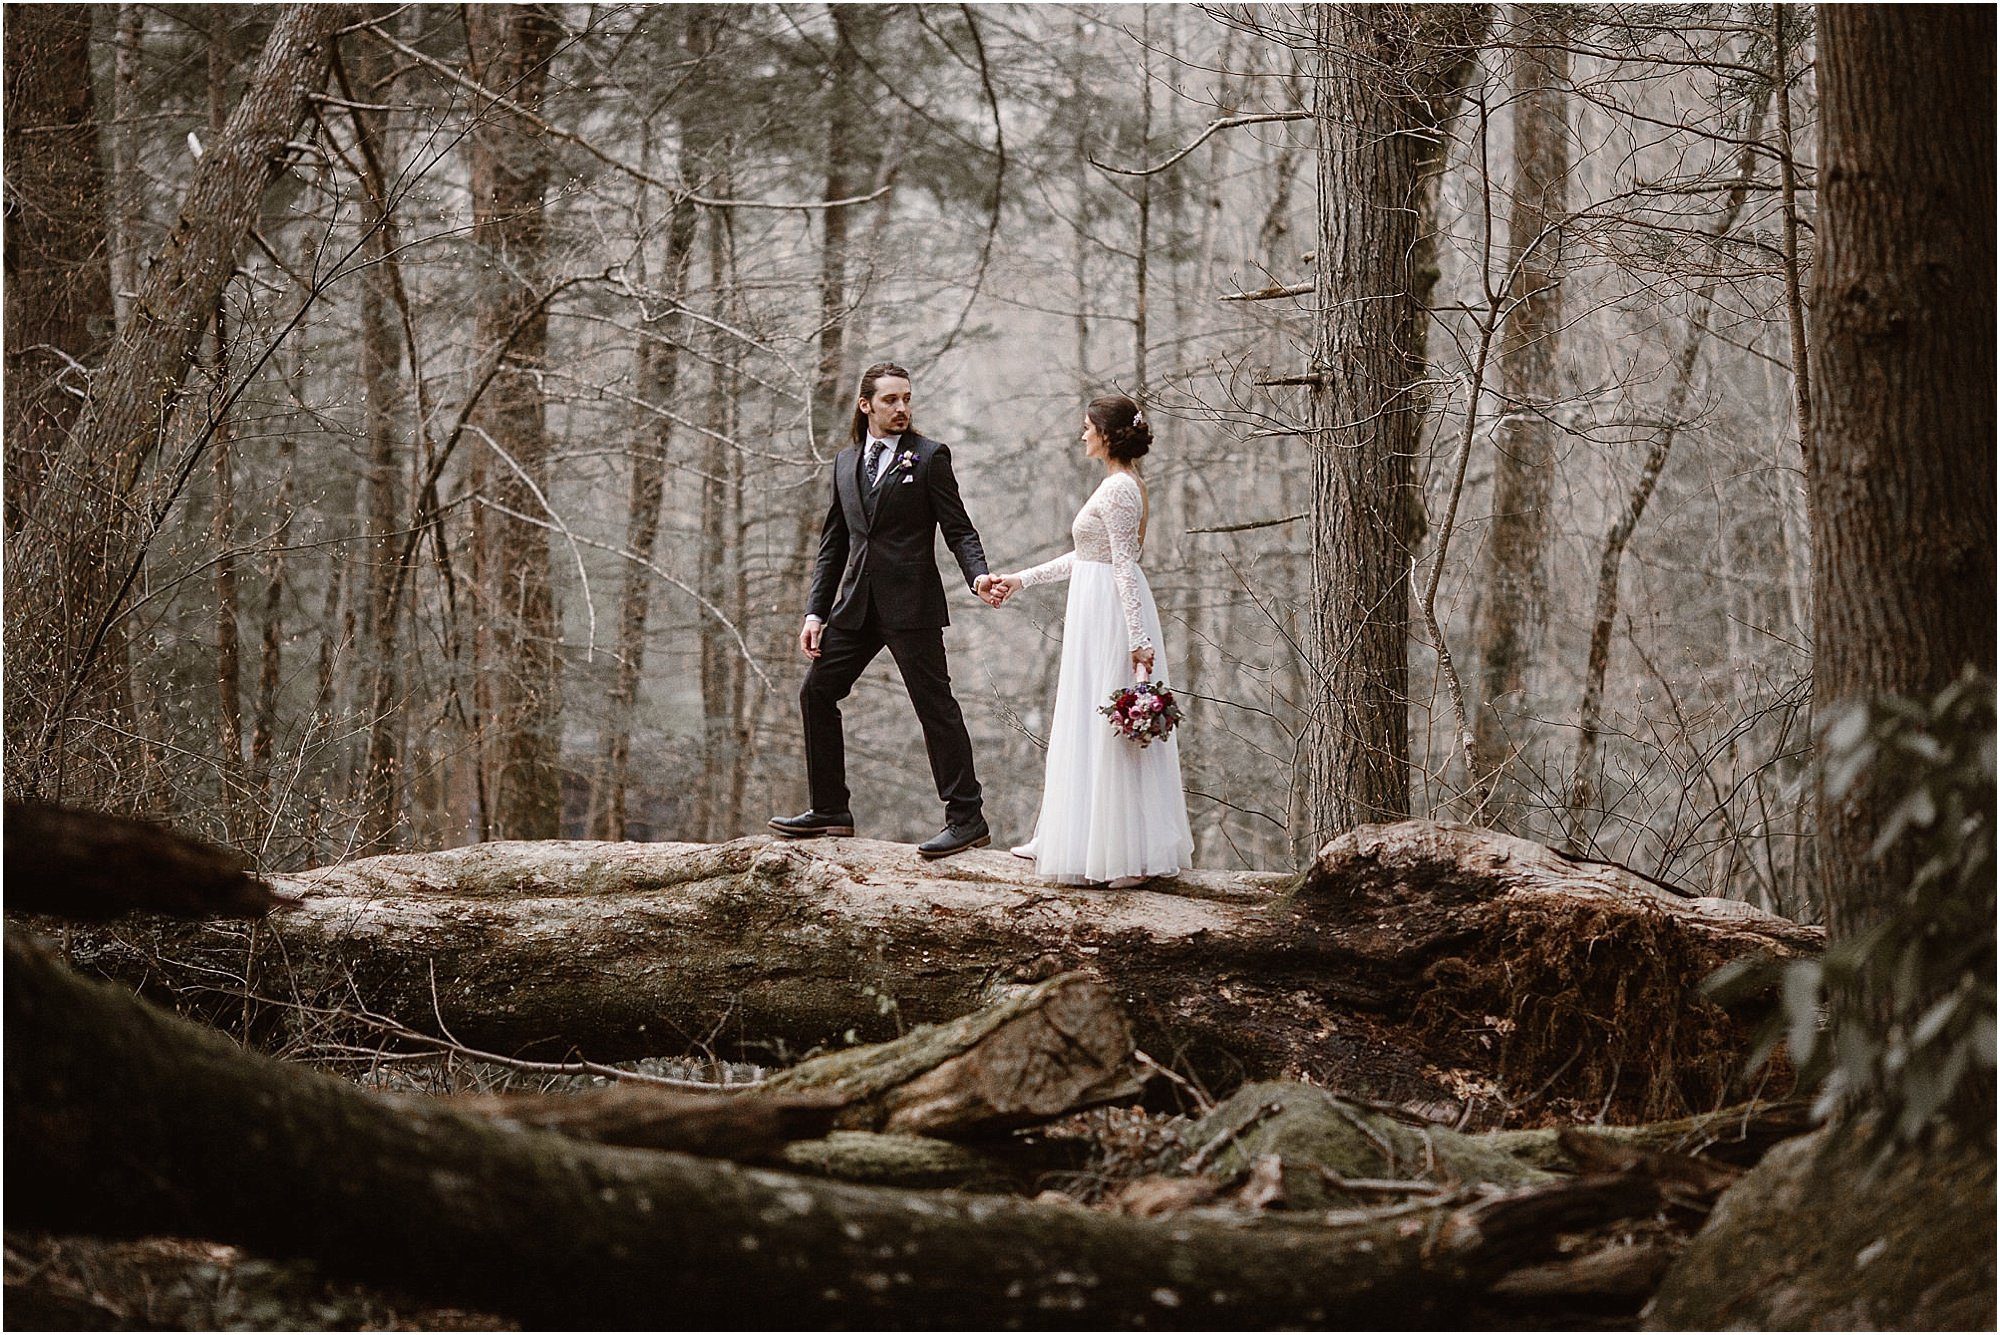 Bride and Groom walking across log at elopement in mountains